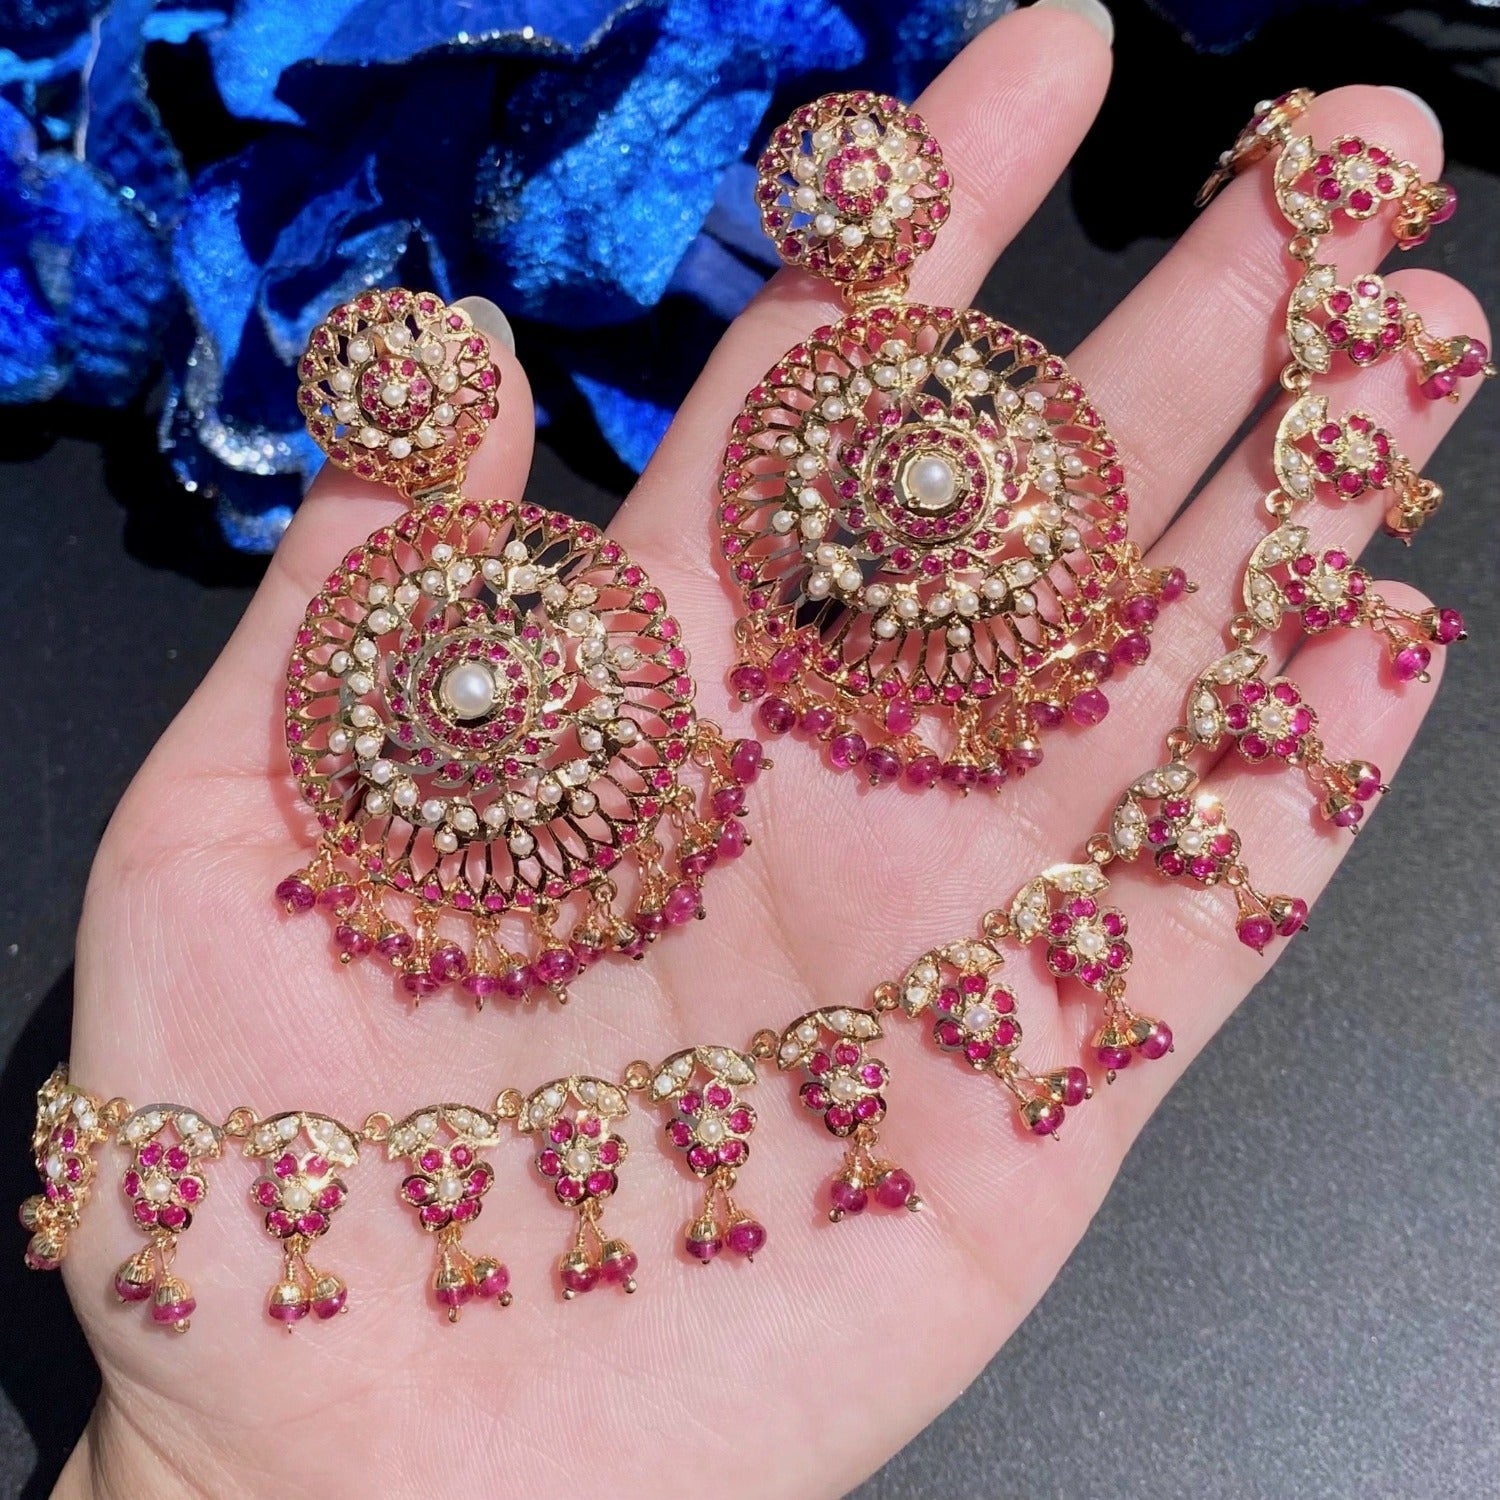 necklace with chandbali earrings